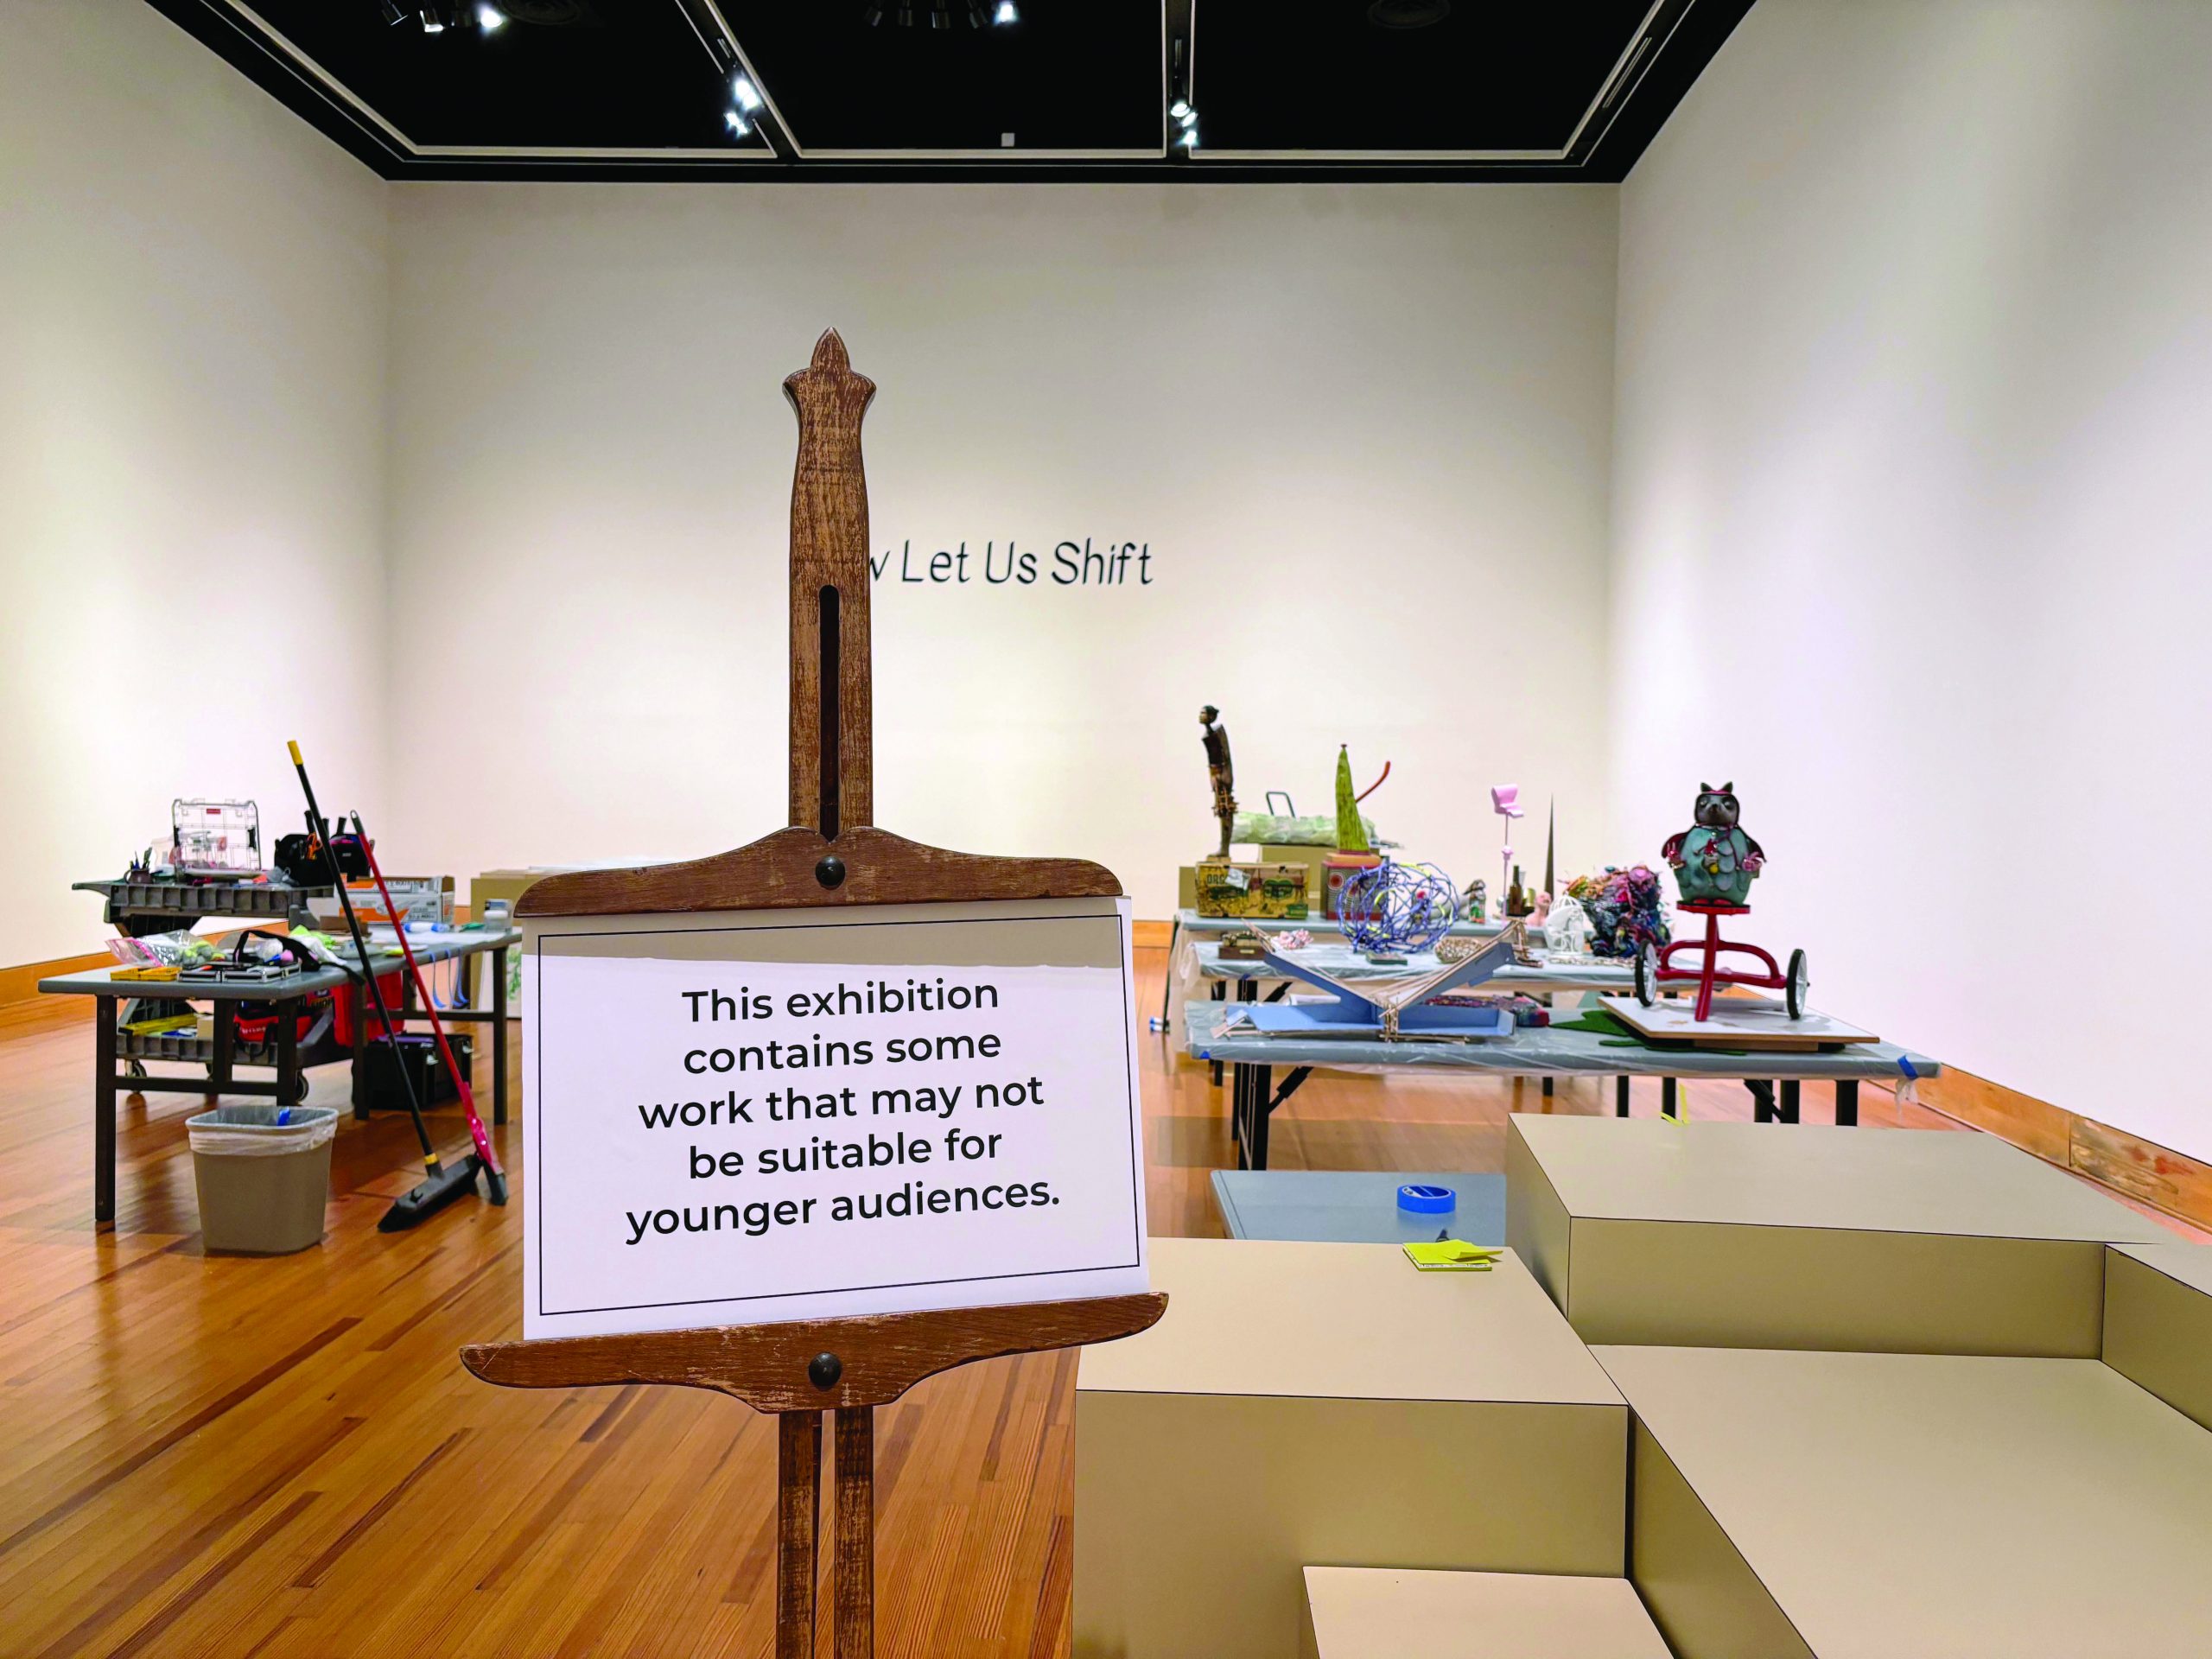 DMC art department to host 58th annual drawing and sculpture event